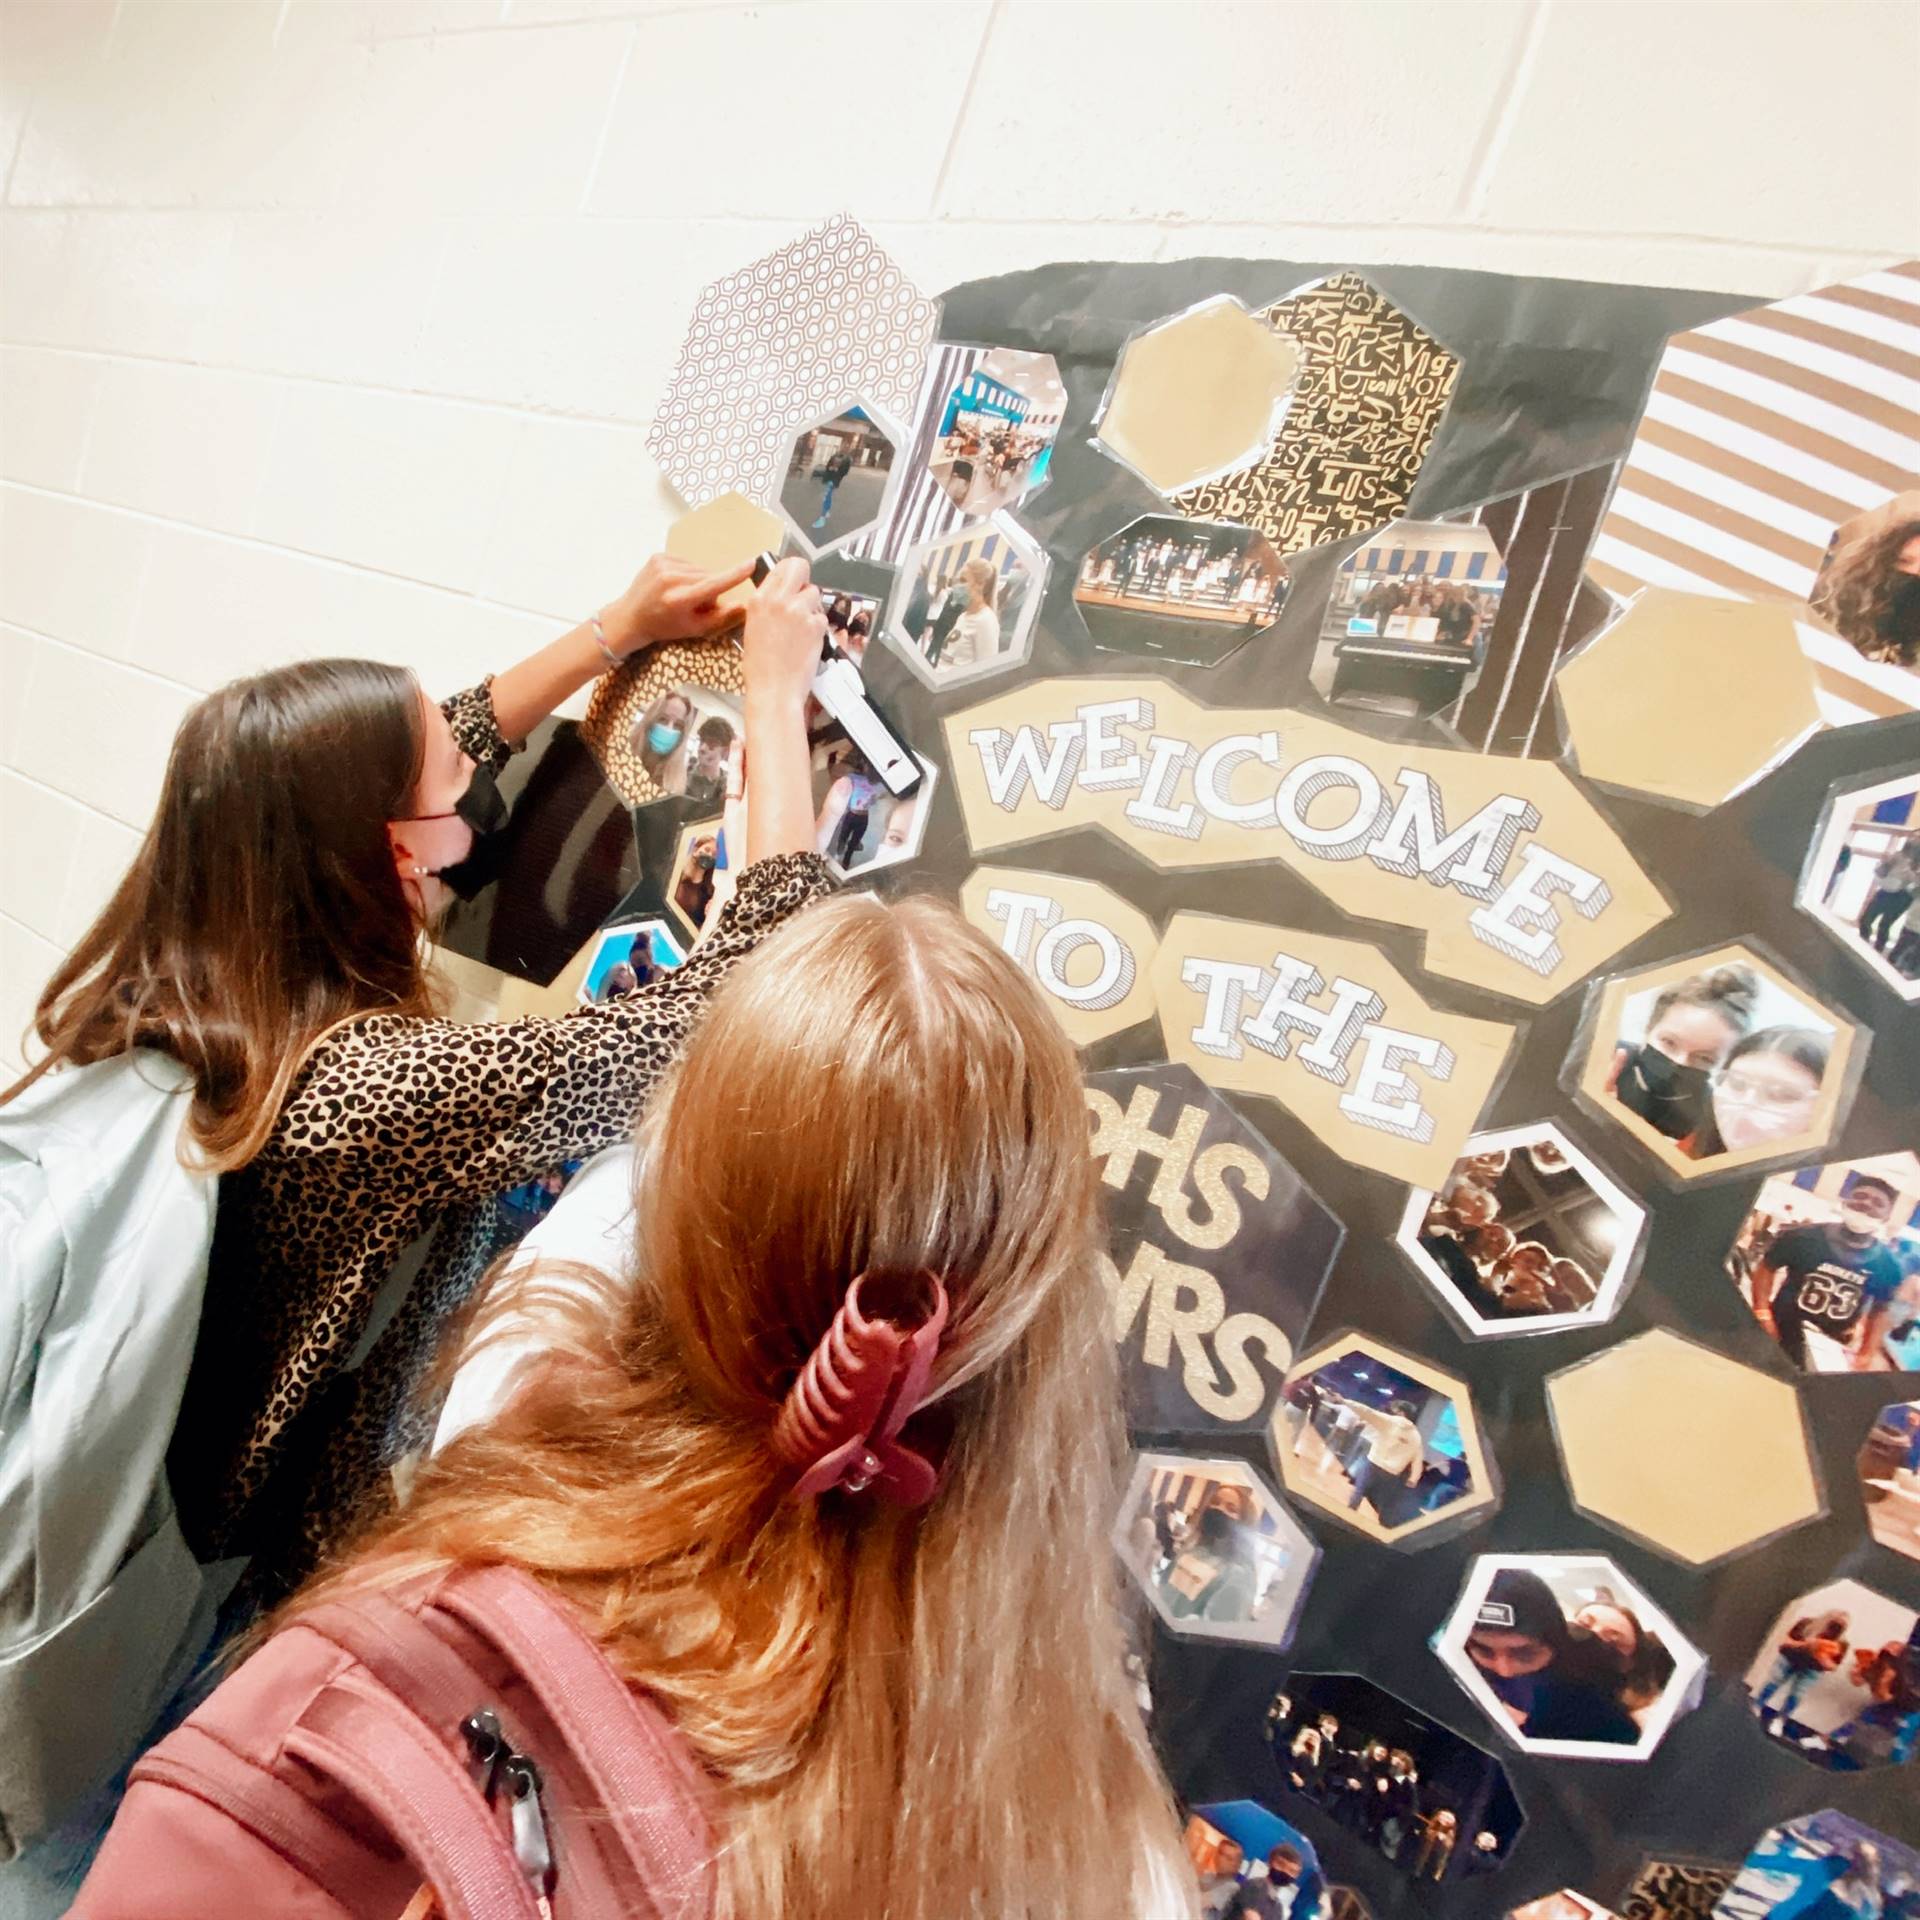 Choir president, Molly Boros, decorates the welcome bulletin board with help from Lauren Rogers